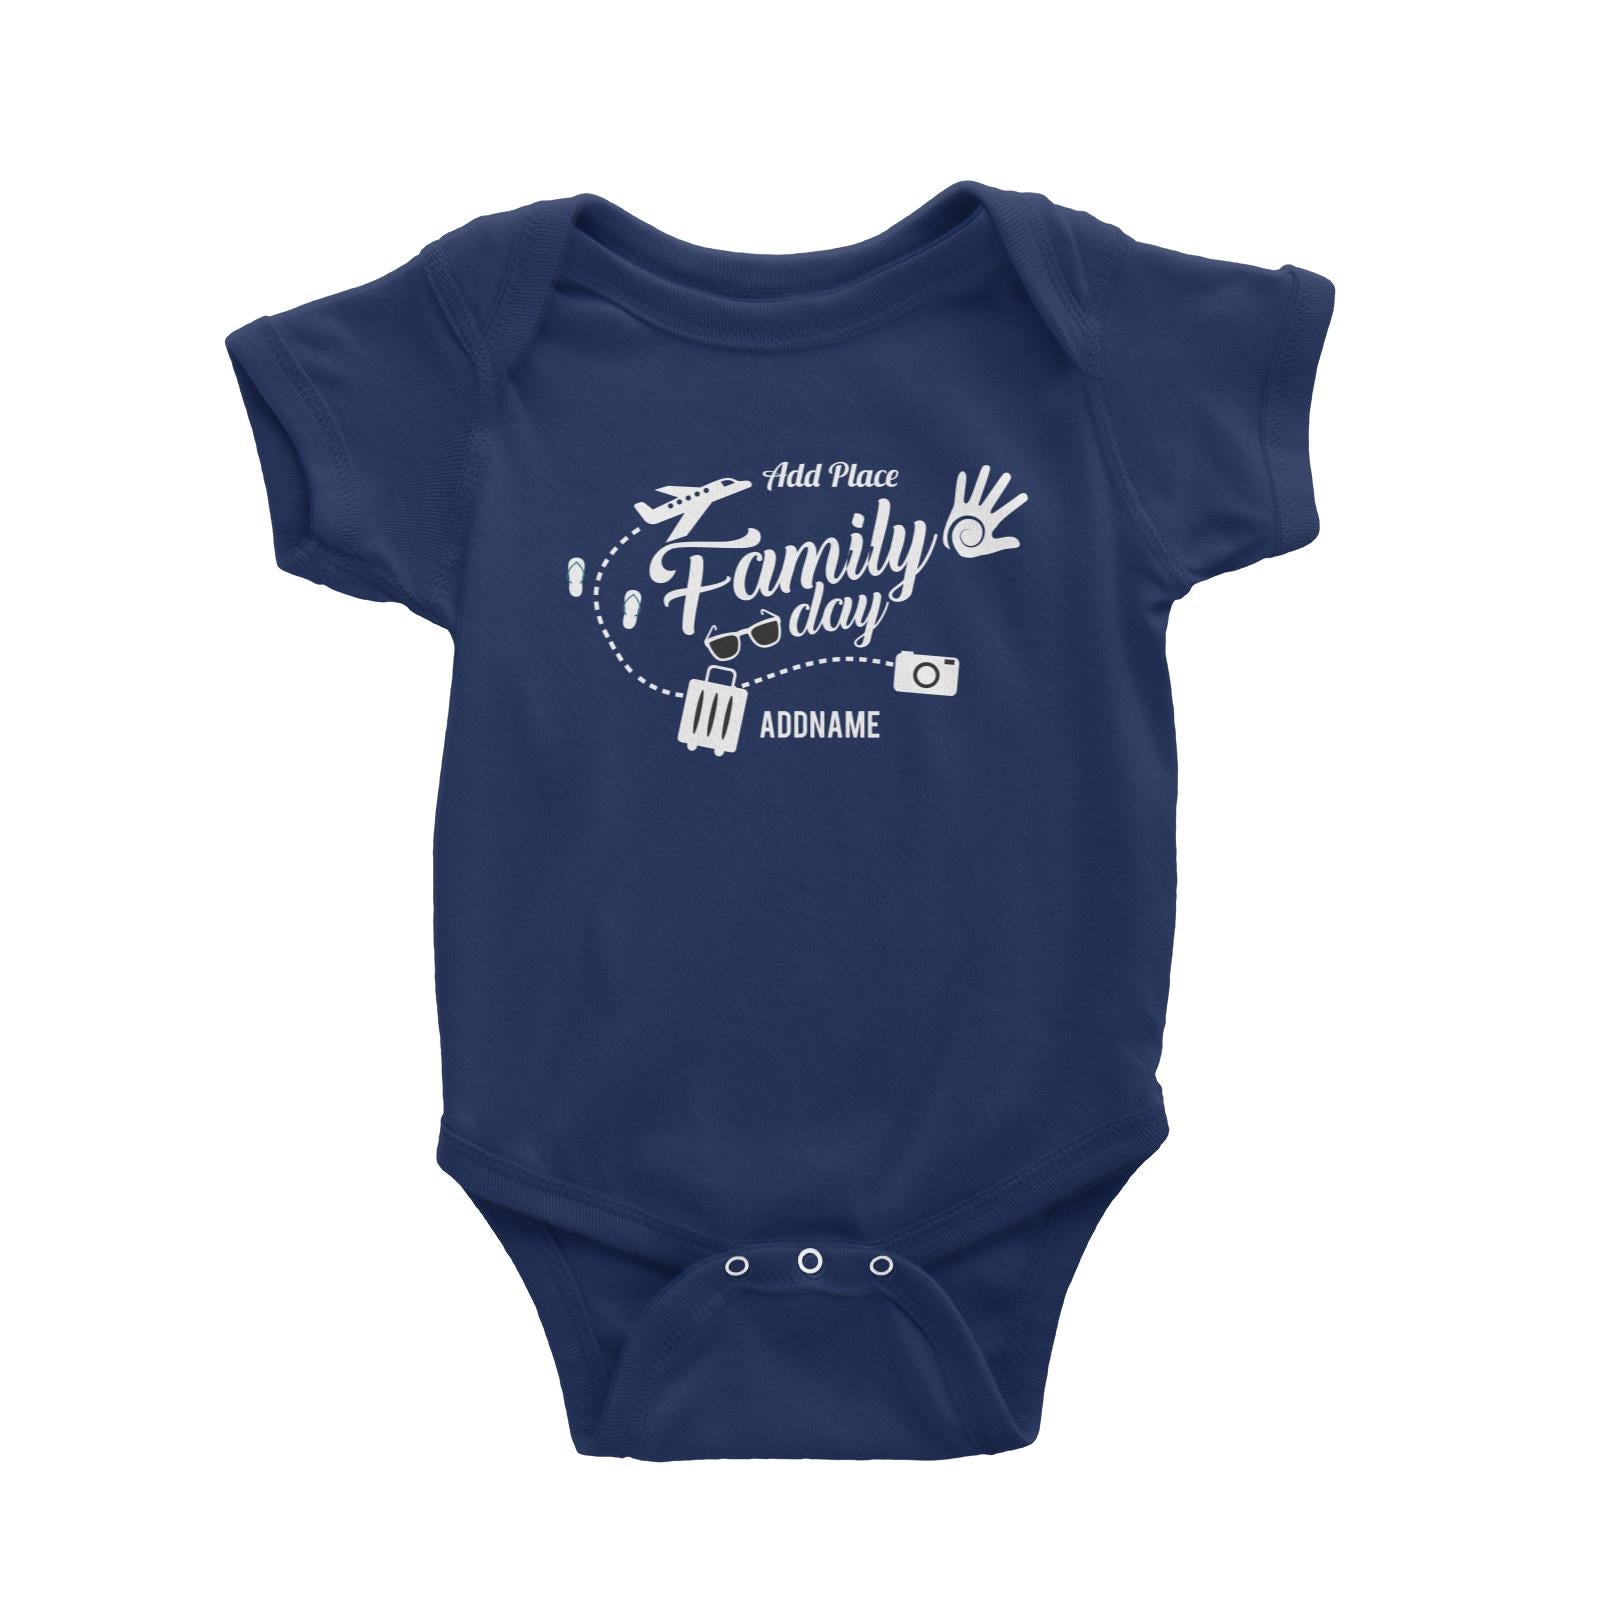 Family Day Flight Vacation Icon Family Day Addname And Add Place Baby Romper